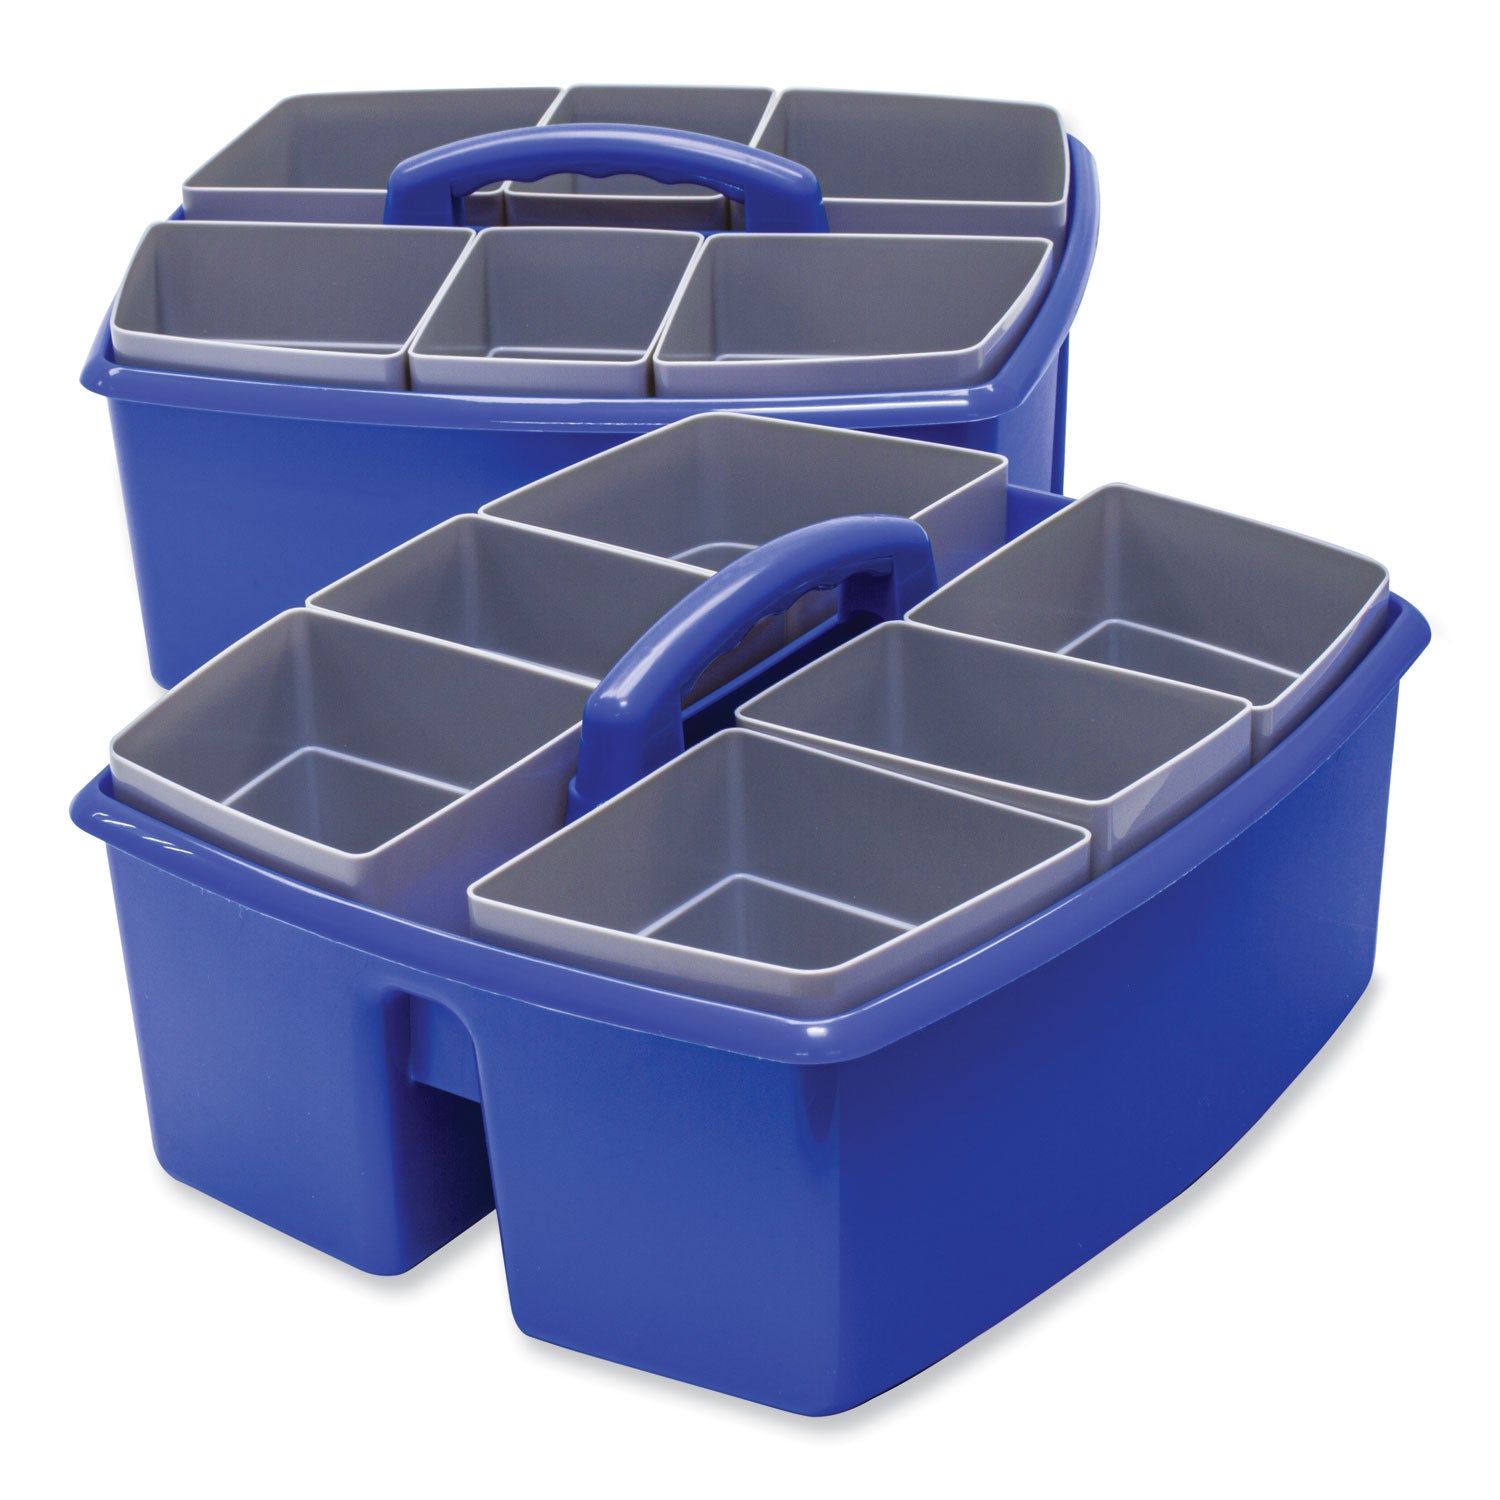 large-caddy-with-sorting-cups-blue-2-carton_stx00985u02c - 2